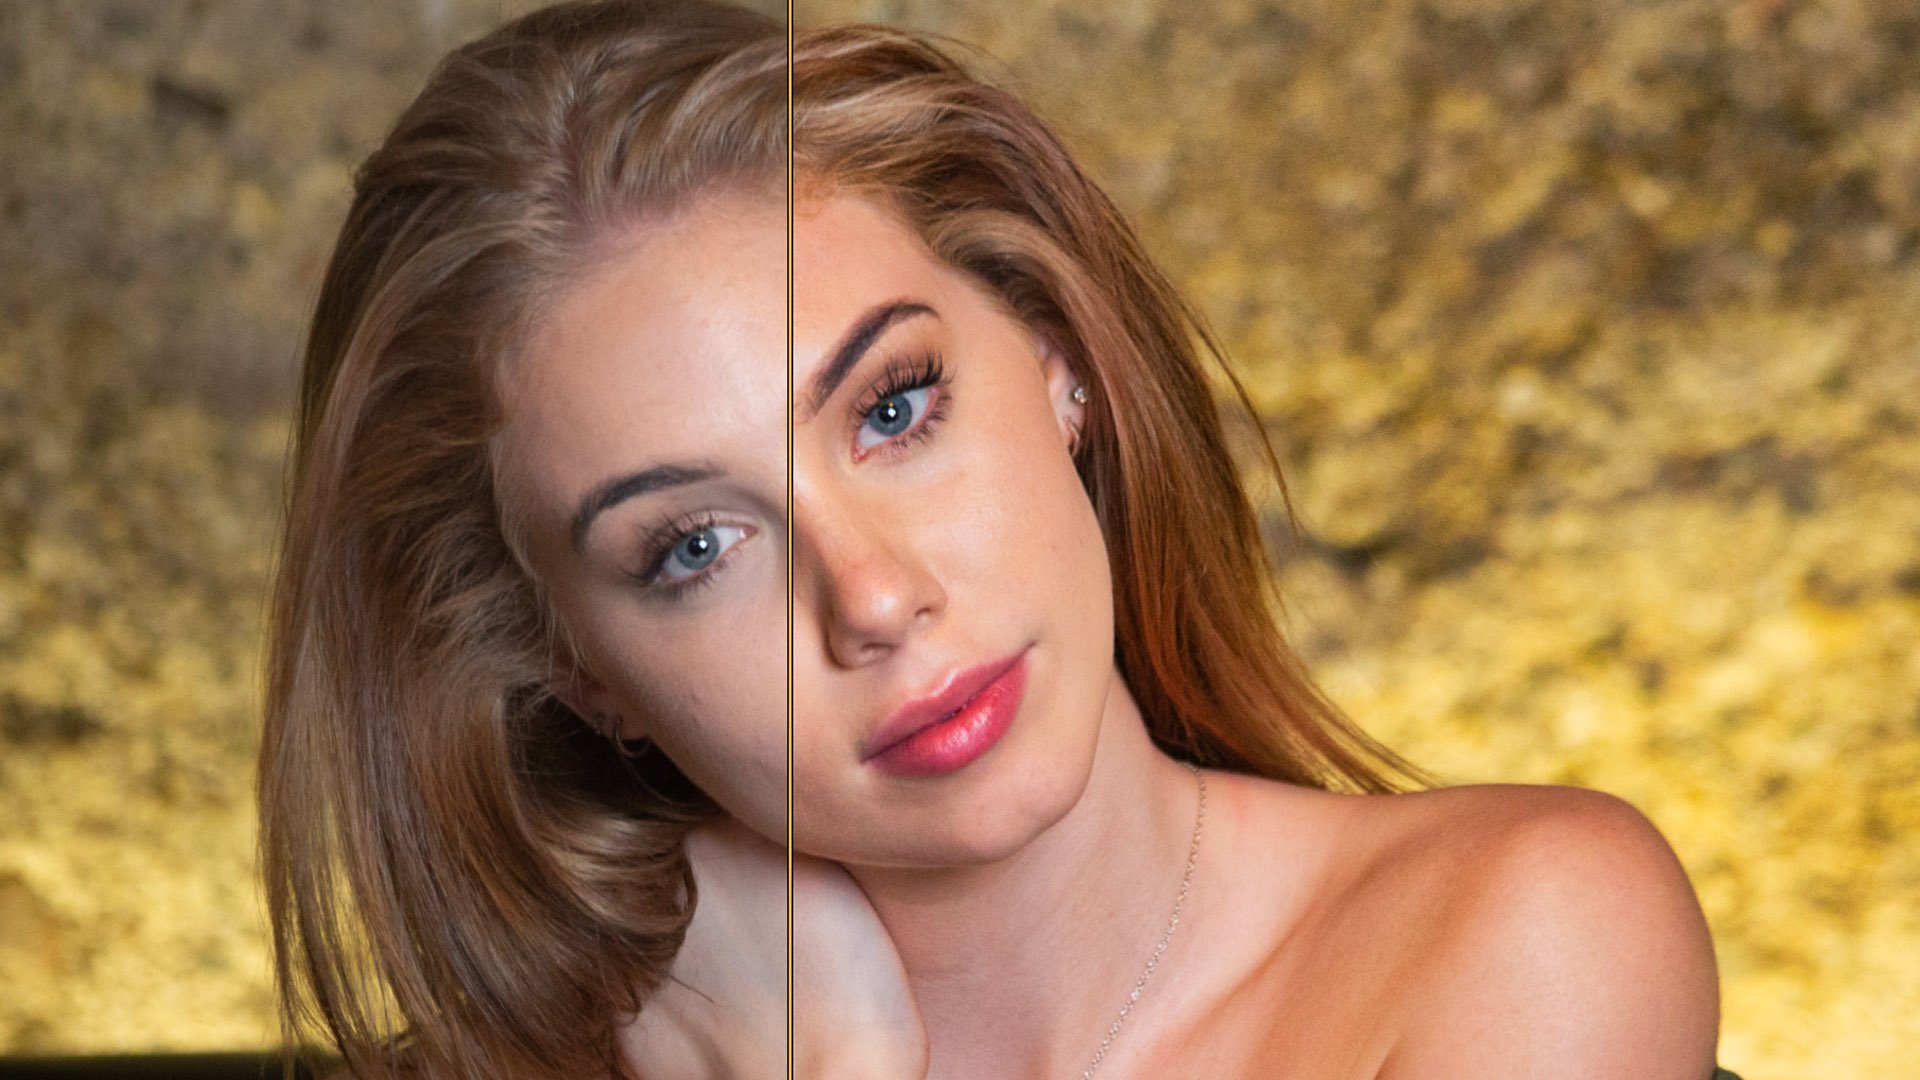 Using Presets in Luminar to Achieve Different Looks